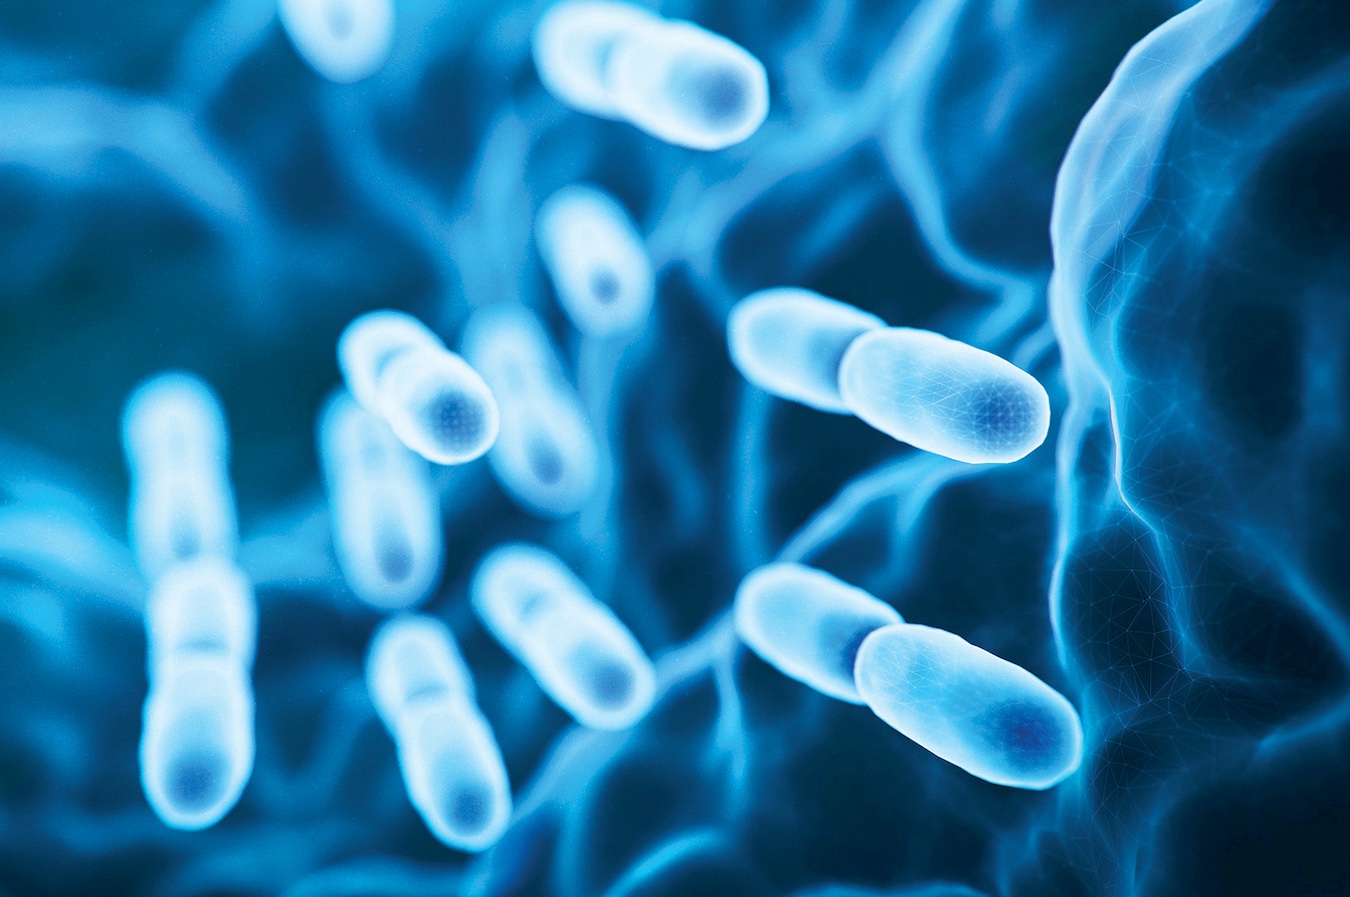 Lactobacillus, a type of probiotic bacteria that live in the gut microbiome.